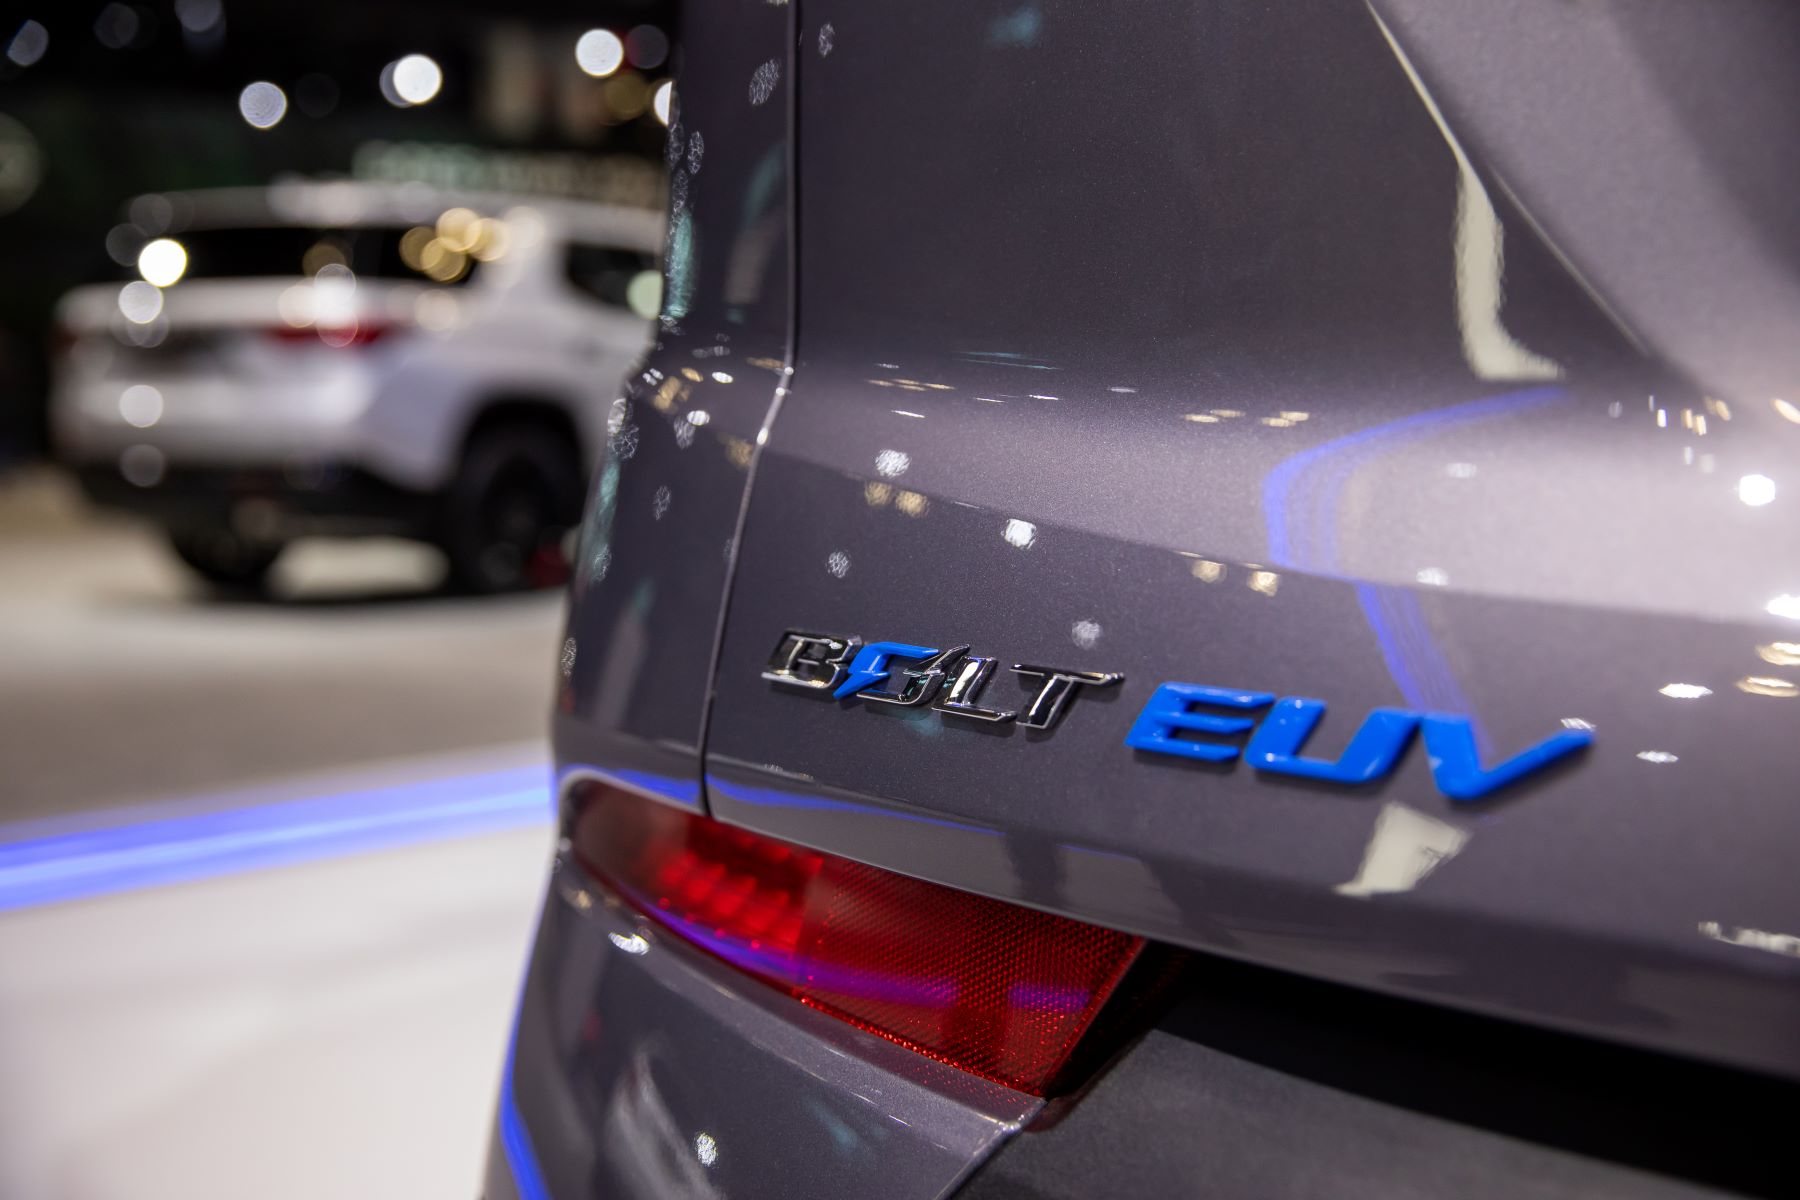 Chevy Bolt EUV (electric utility vehicle) rear badging seen at the 2022 New York International Auto Show